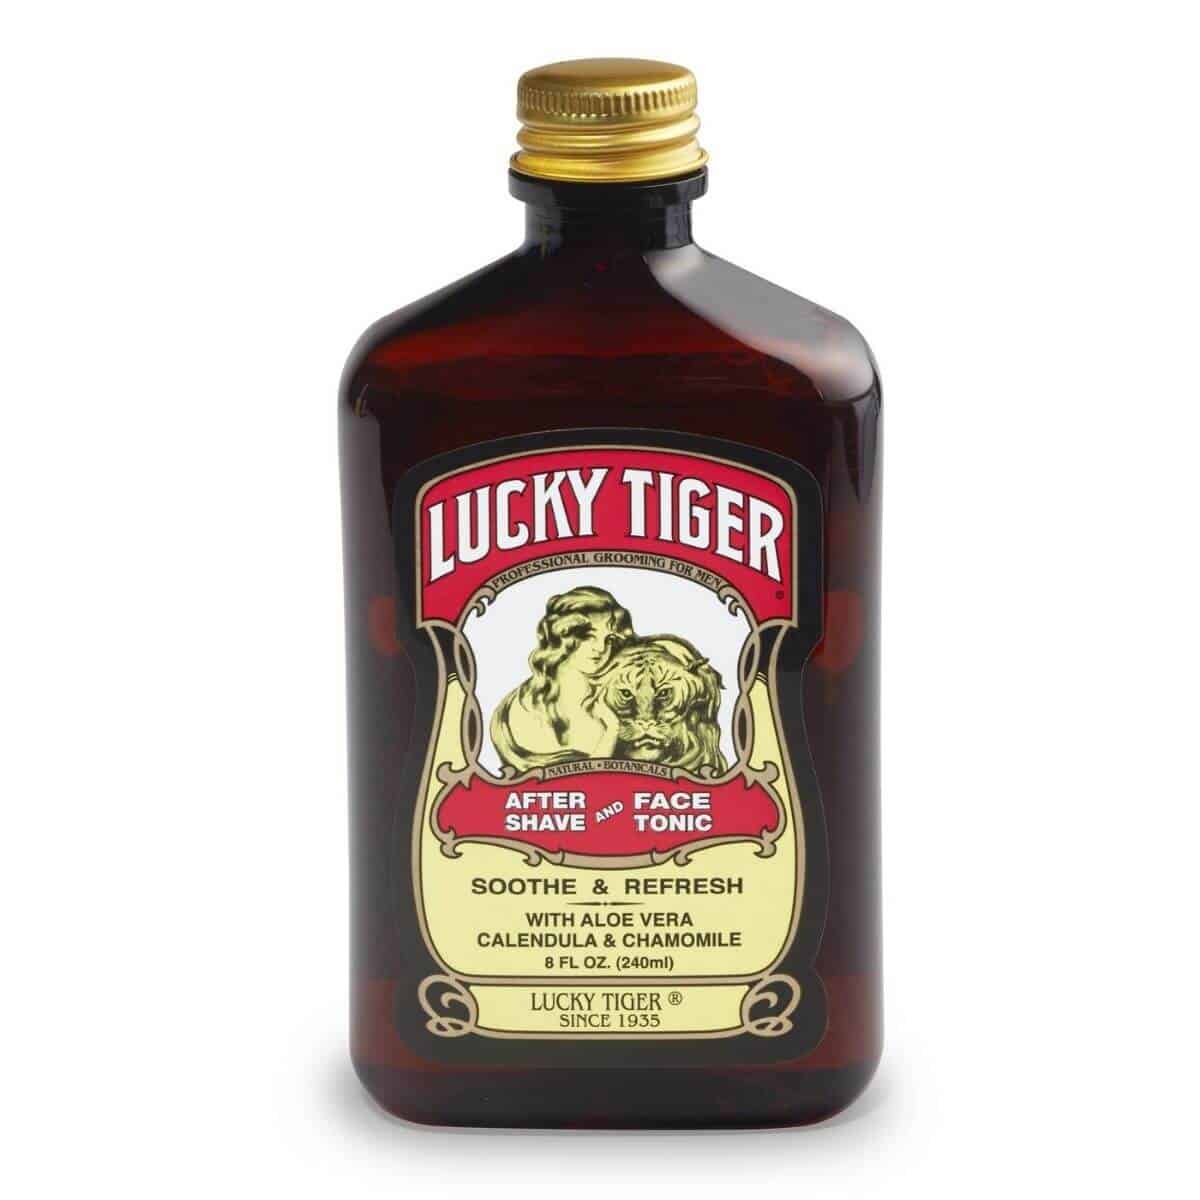 Lucky Tiger aftershave bottle.